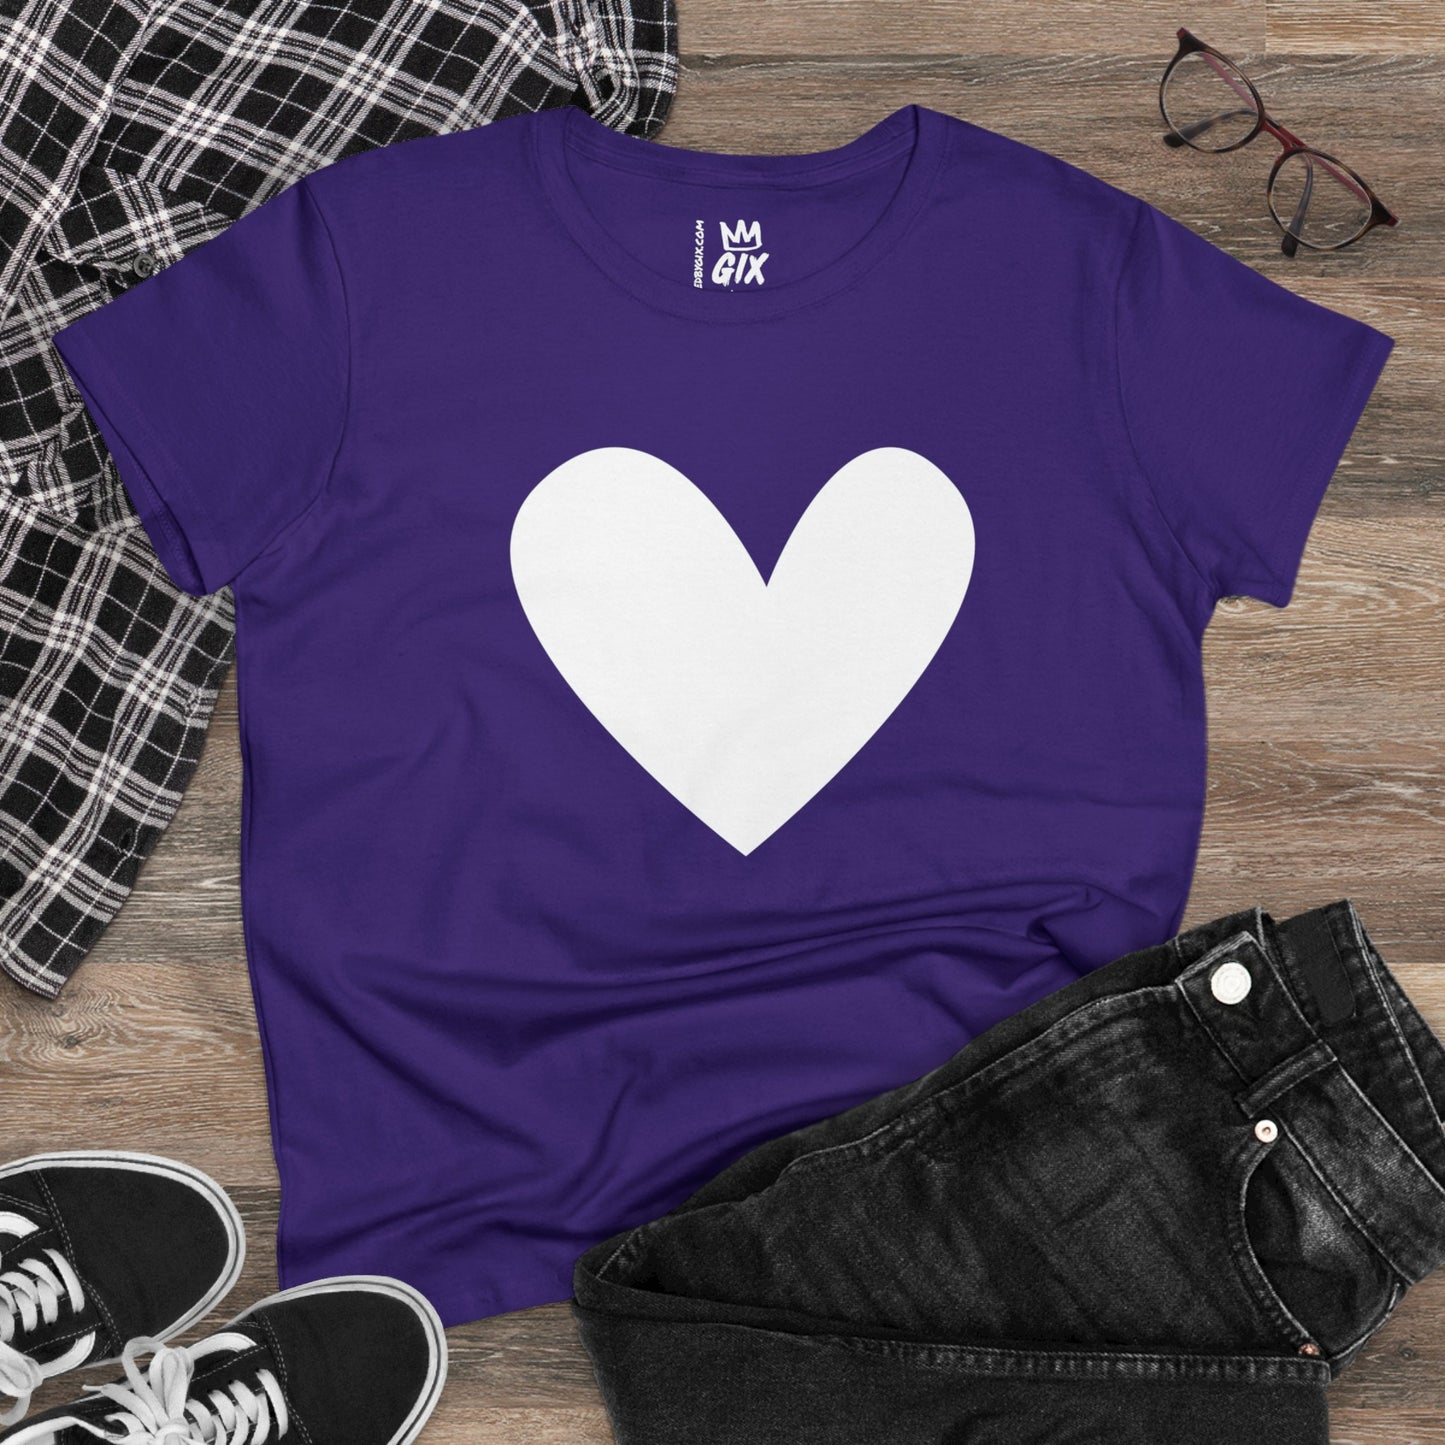 Bold Heart Tee - 100% Cotton Semi-Fitted T-Shirt with Bold Heart Design